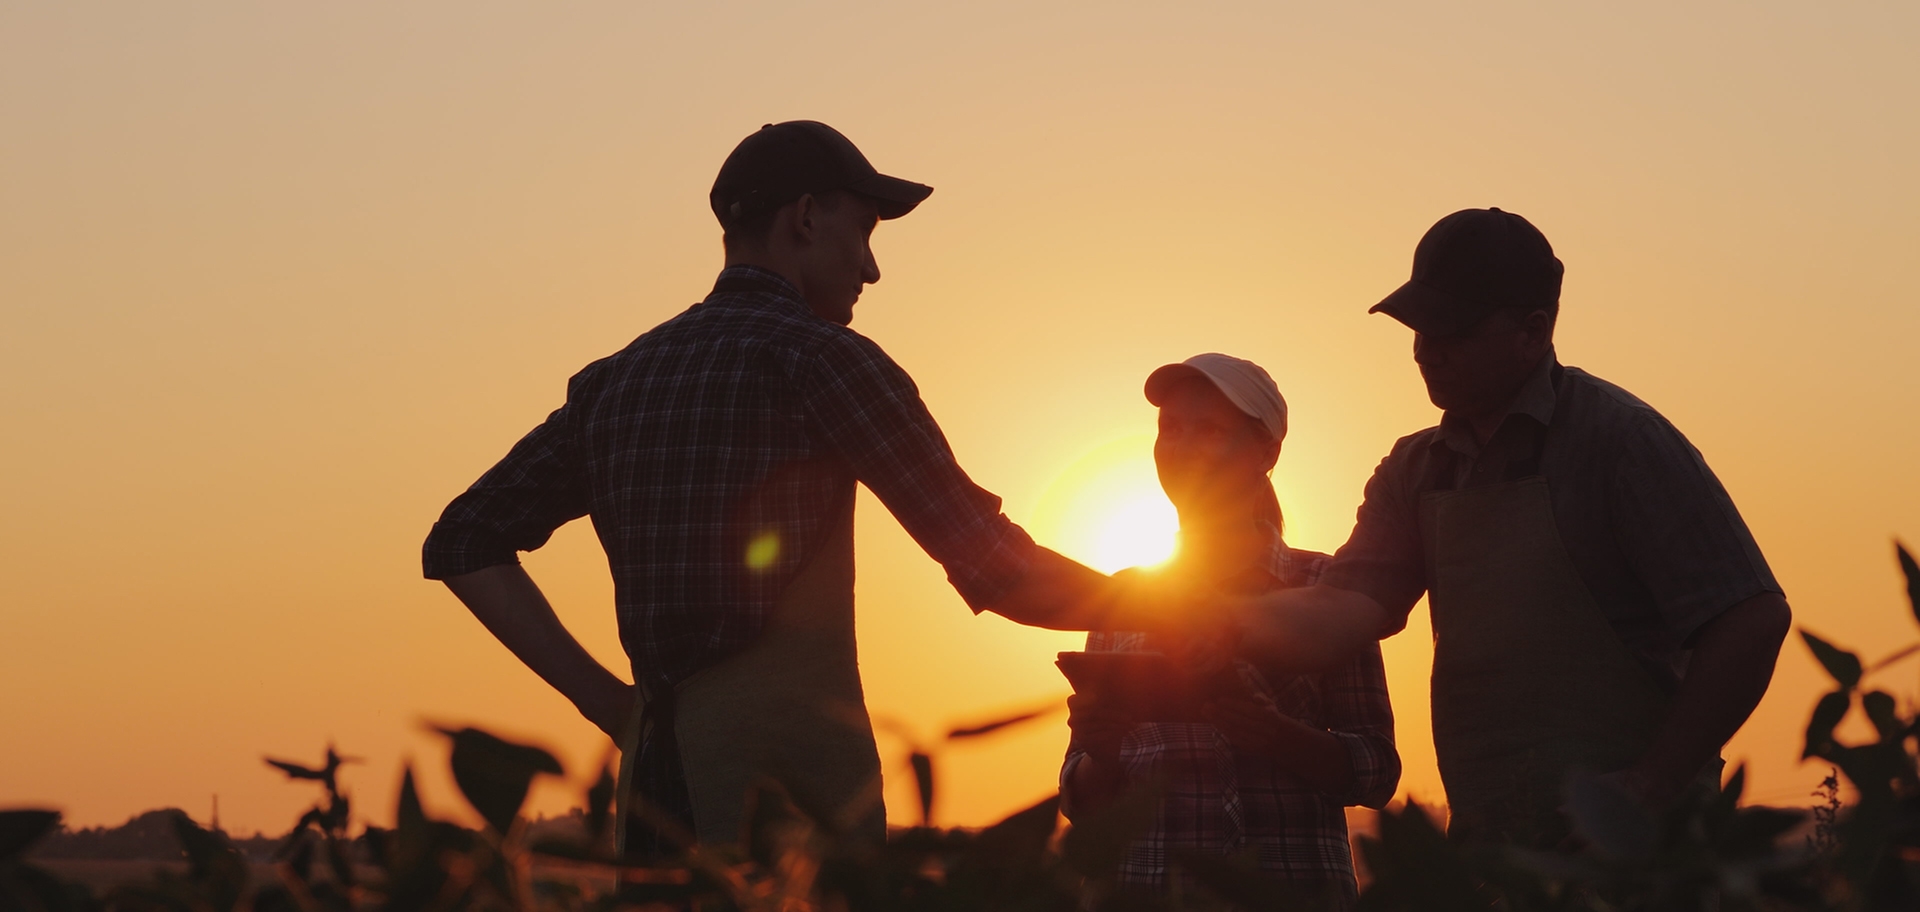 A group of farmers shaking hands in front of a sunset